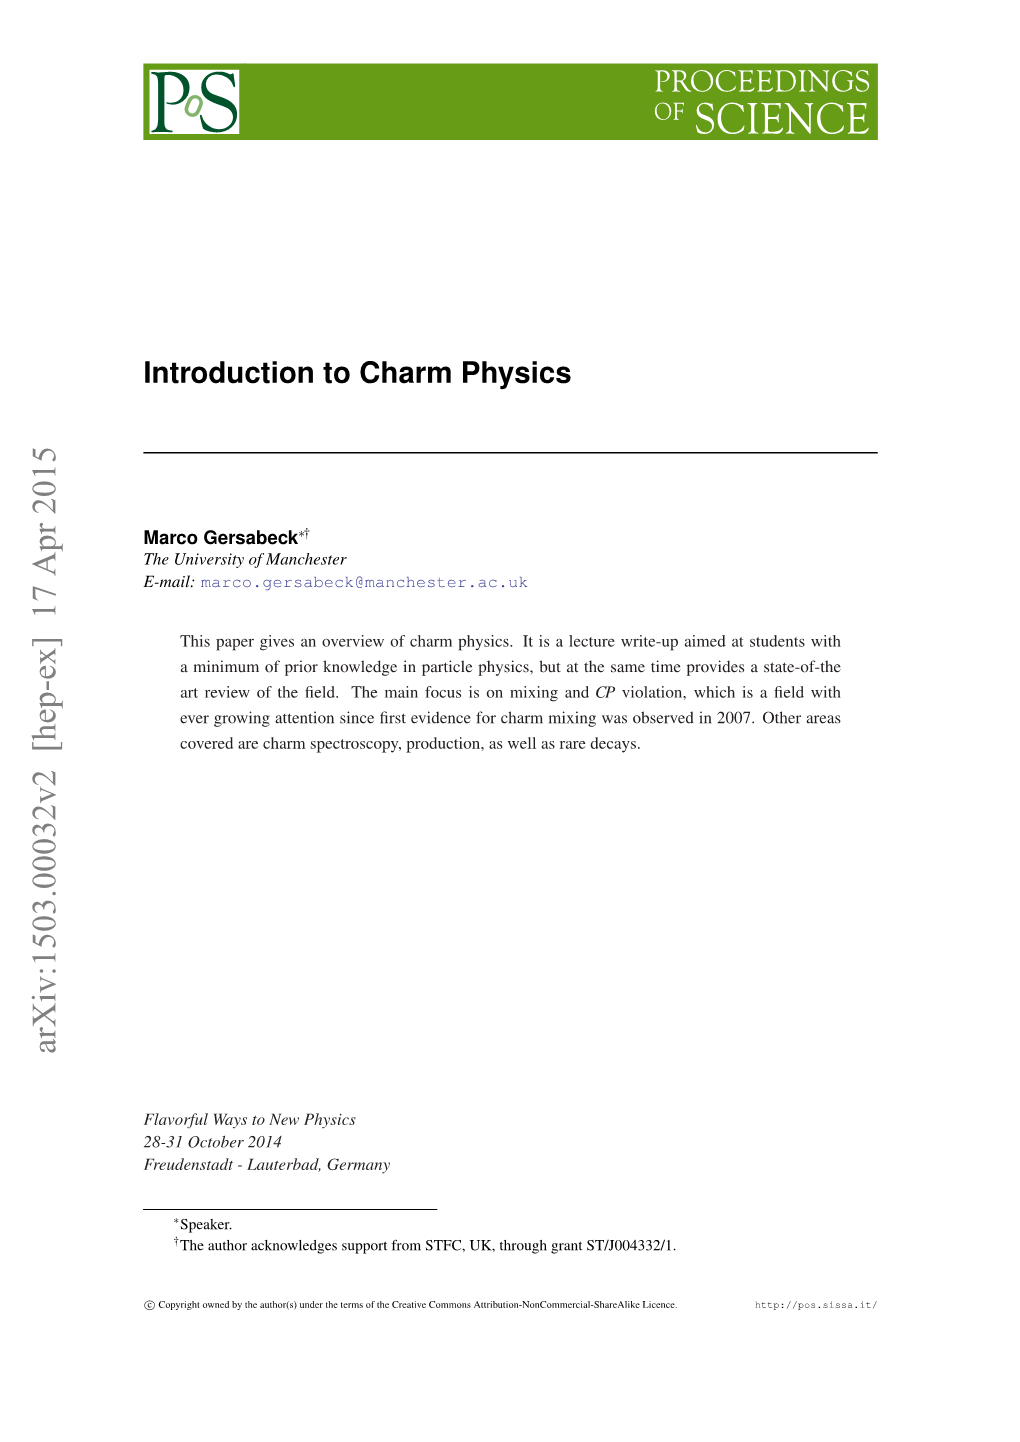 Introduction to Charm Physics